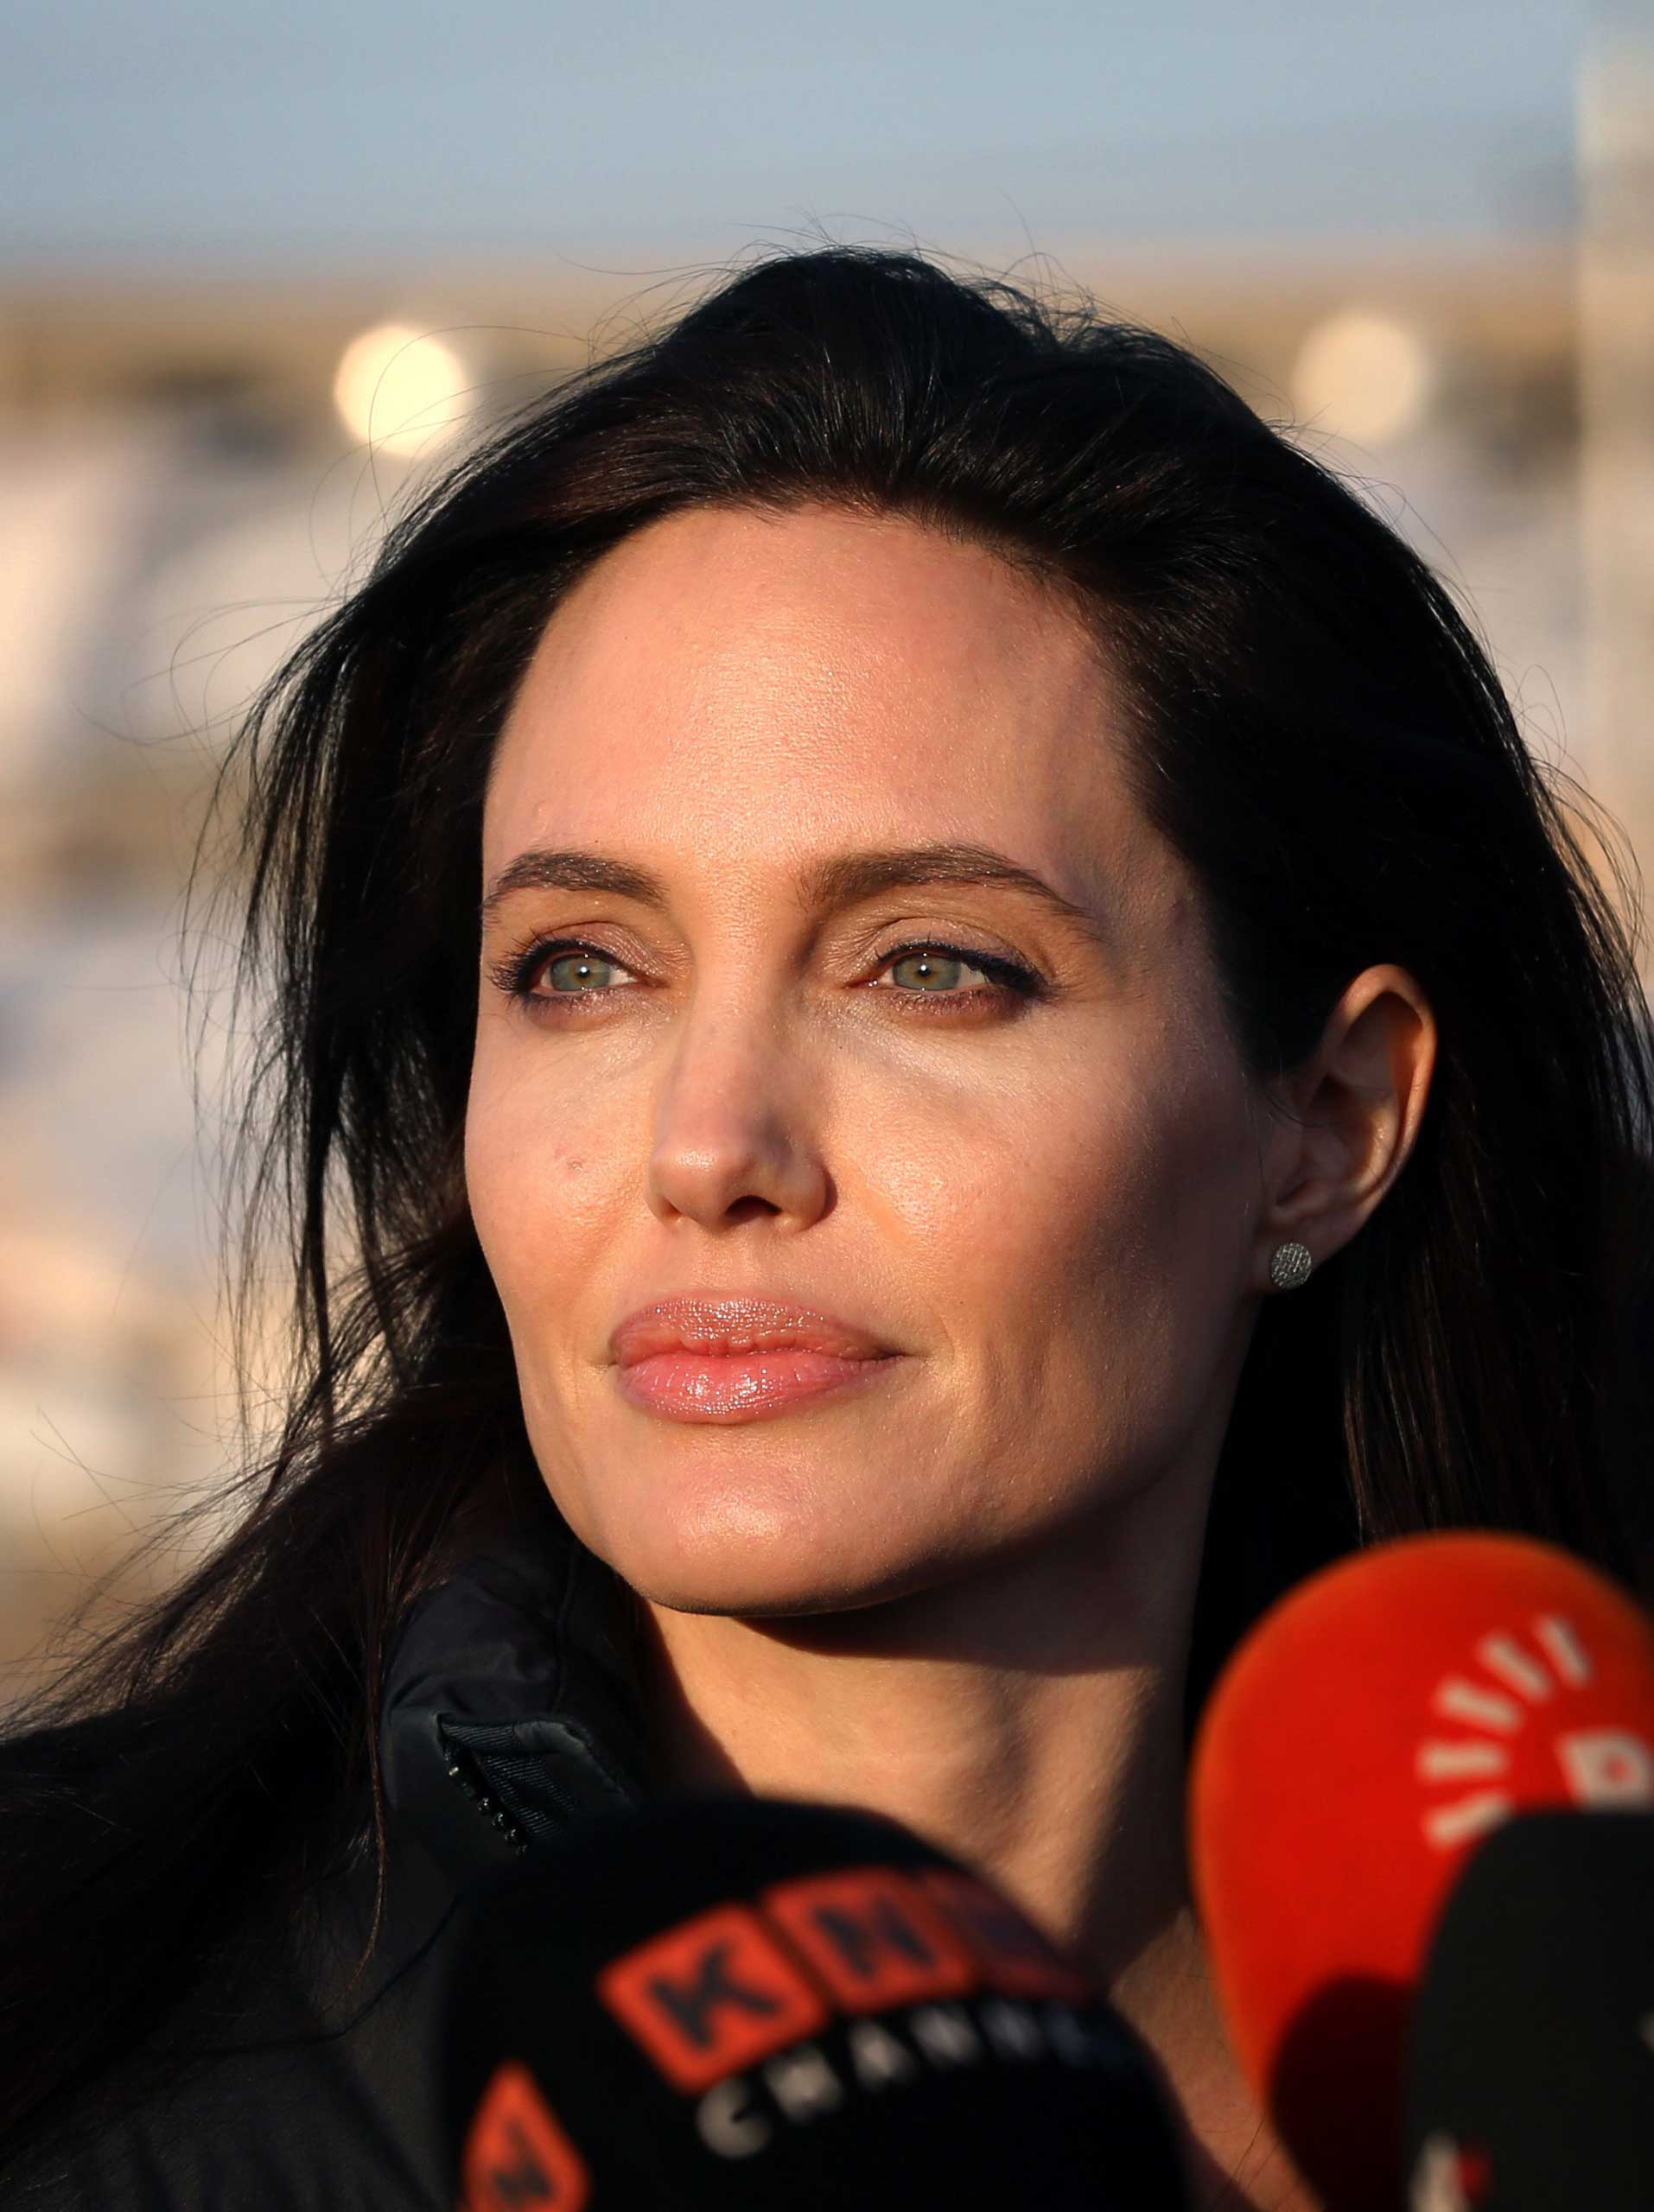 Angelina Jolie pauses as she delivers a speech during a visit to a camp for displaced Iraqis in Khanke, a few kilometers from the Turkish border in Iraq's Dohuk province on Jan. 25, 2015. (Safin Hamed—AFP/Getty Images)